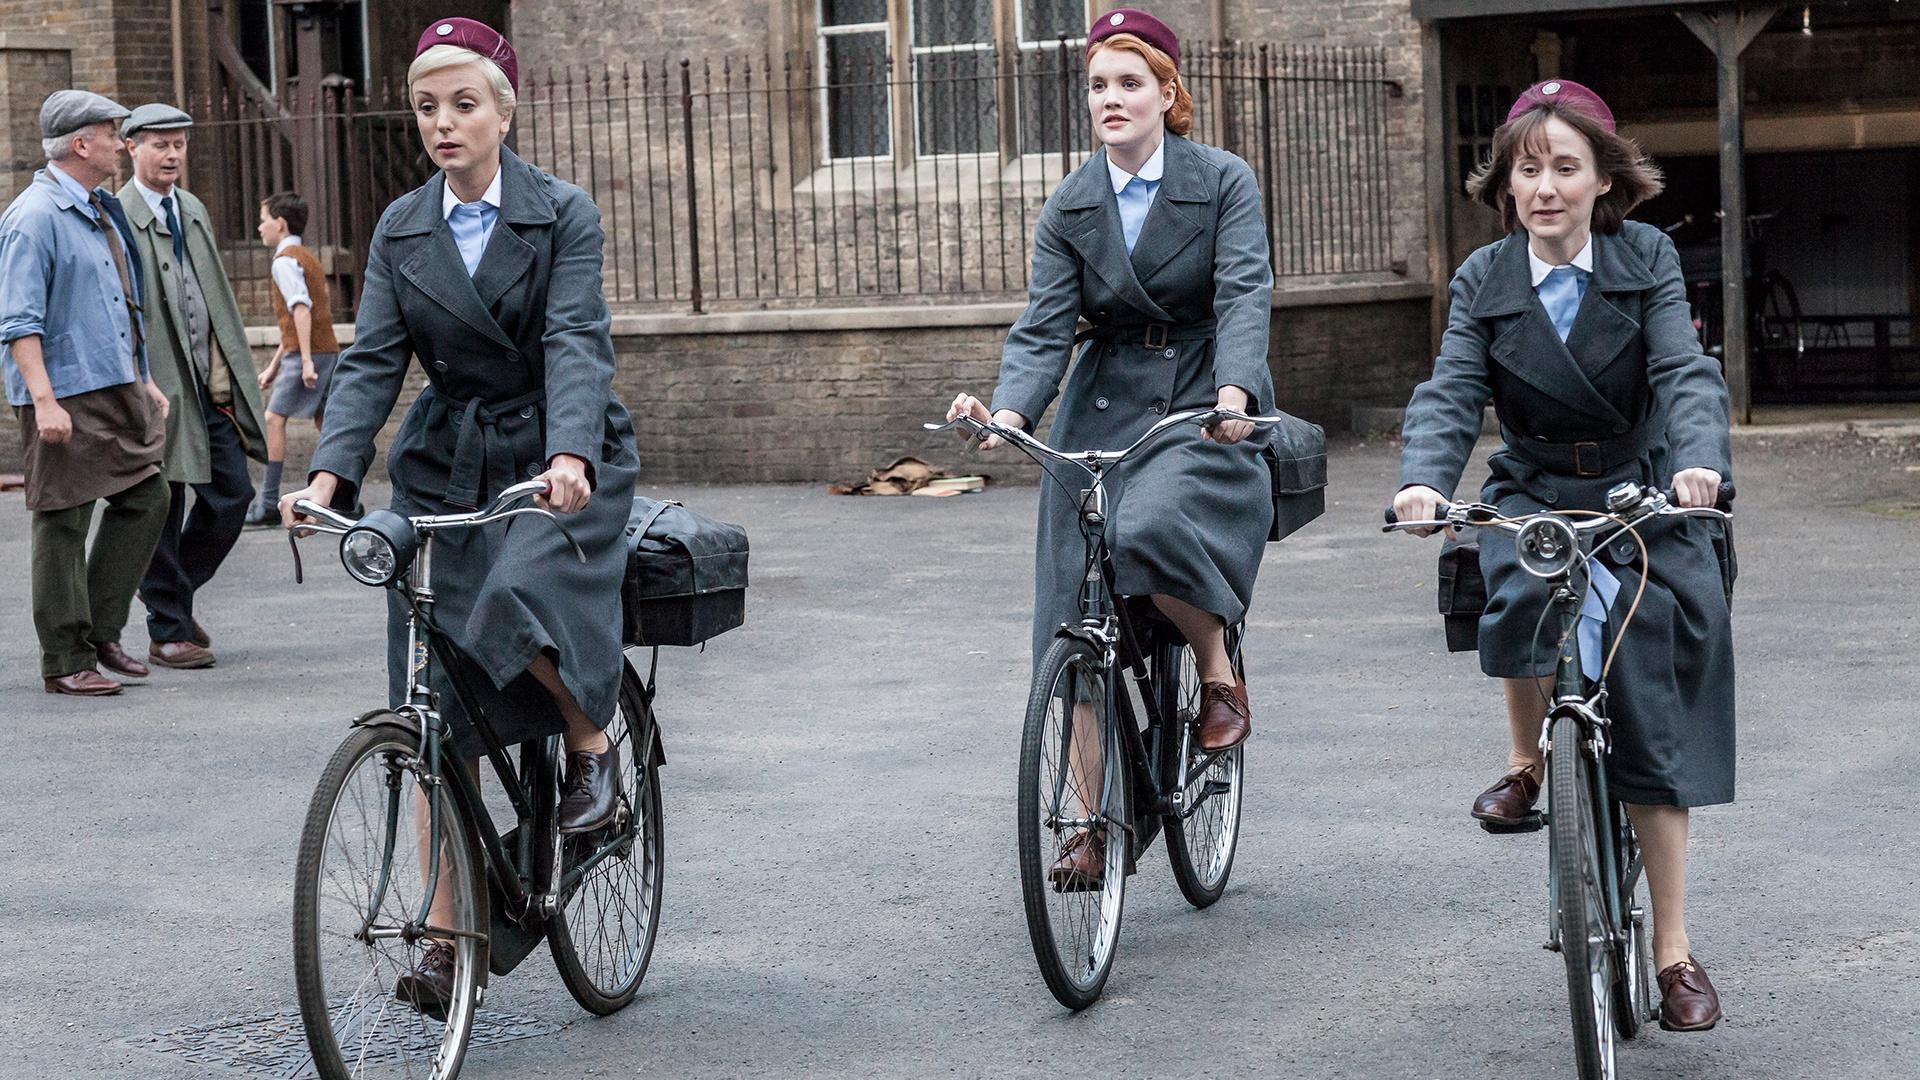 Call The Midwife Wallpapers